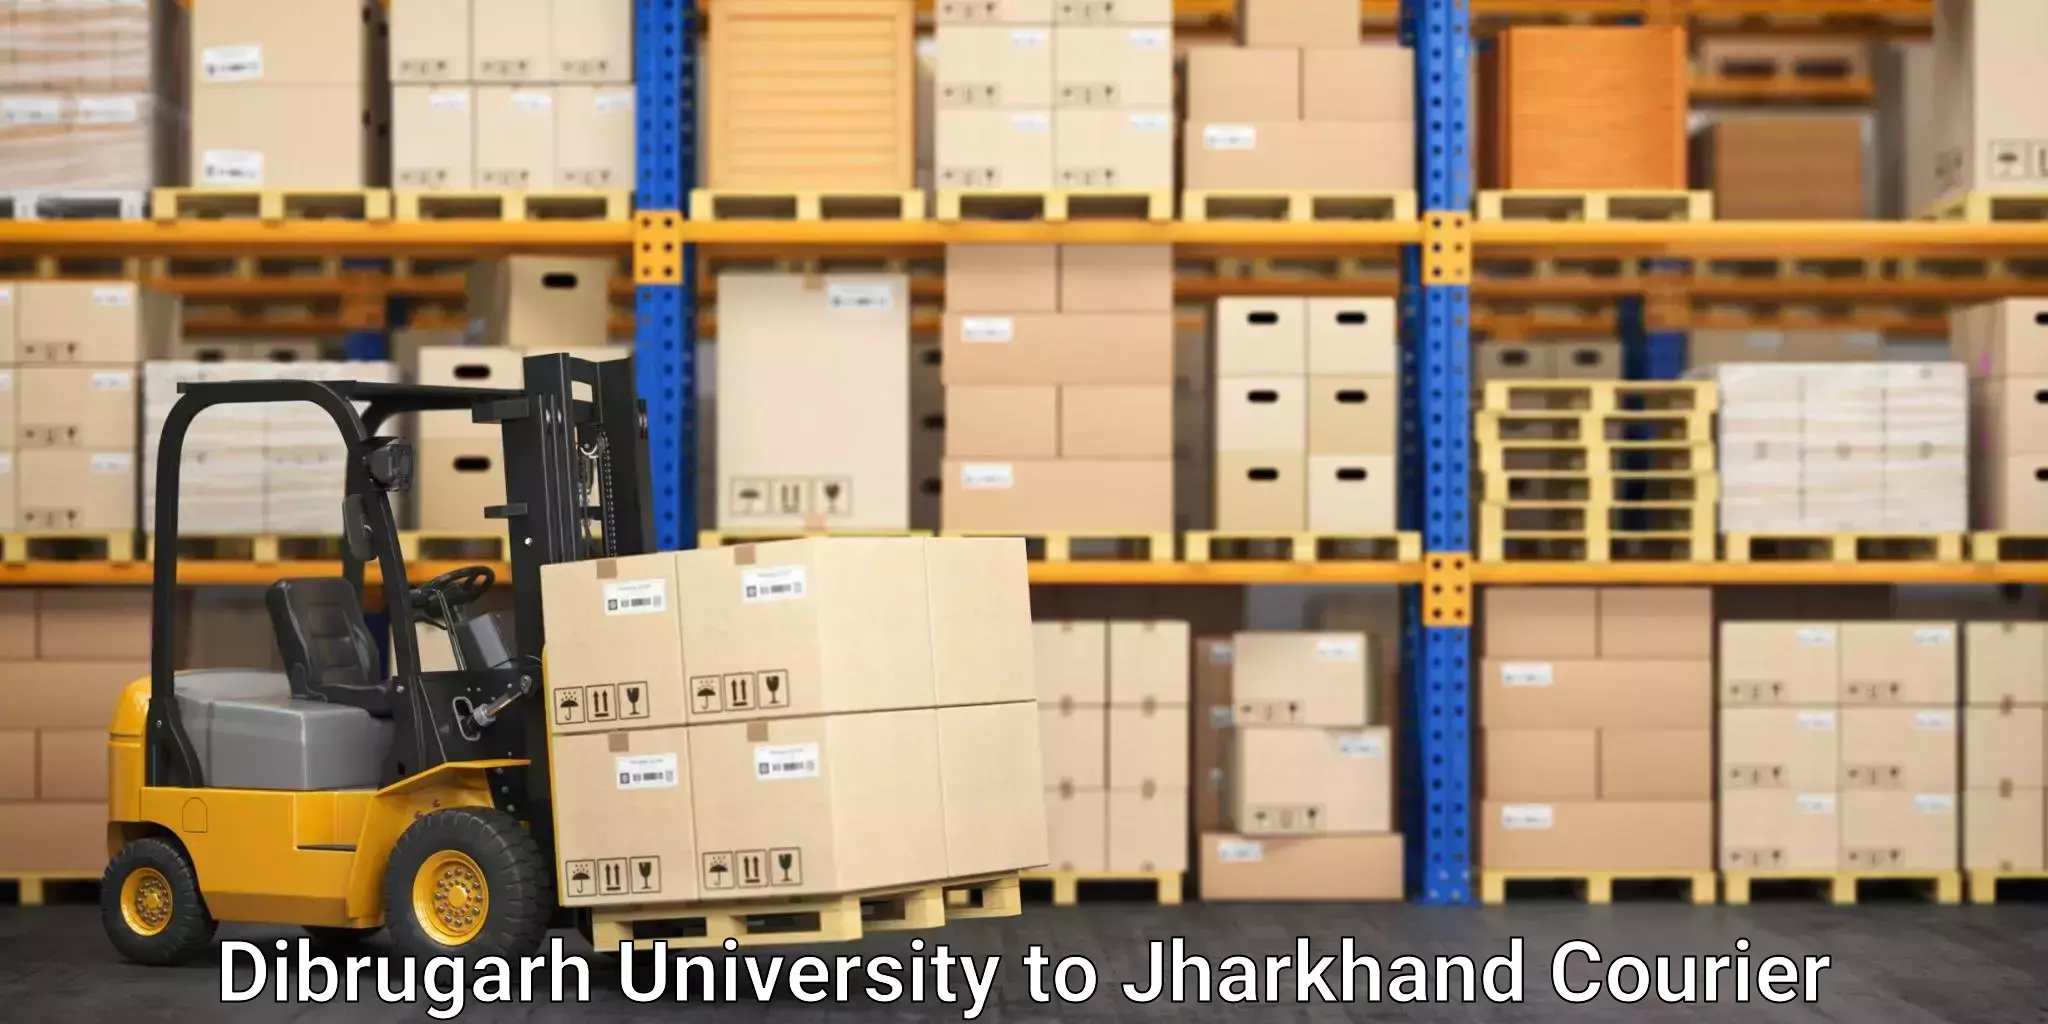 Multi-carrier shipping Dibrugarh University to Domchanch